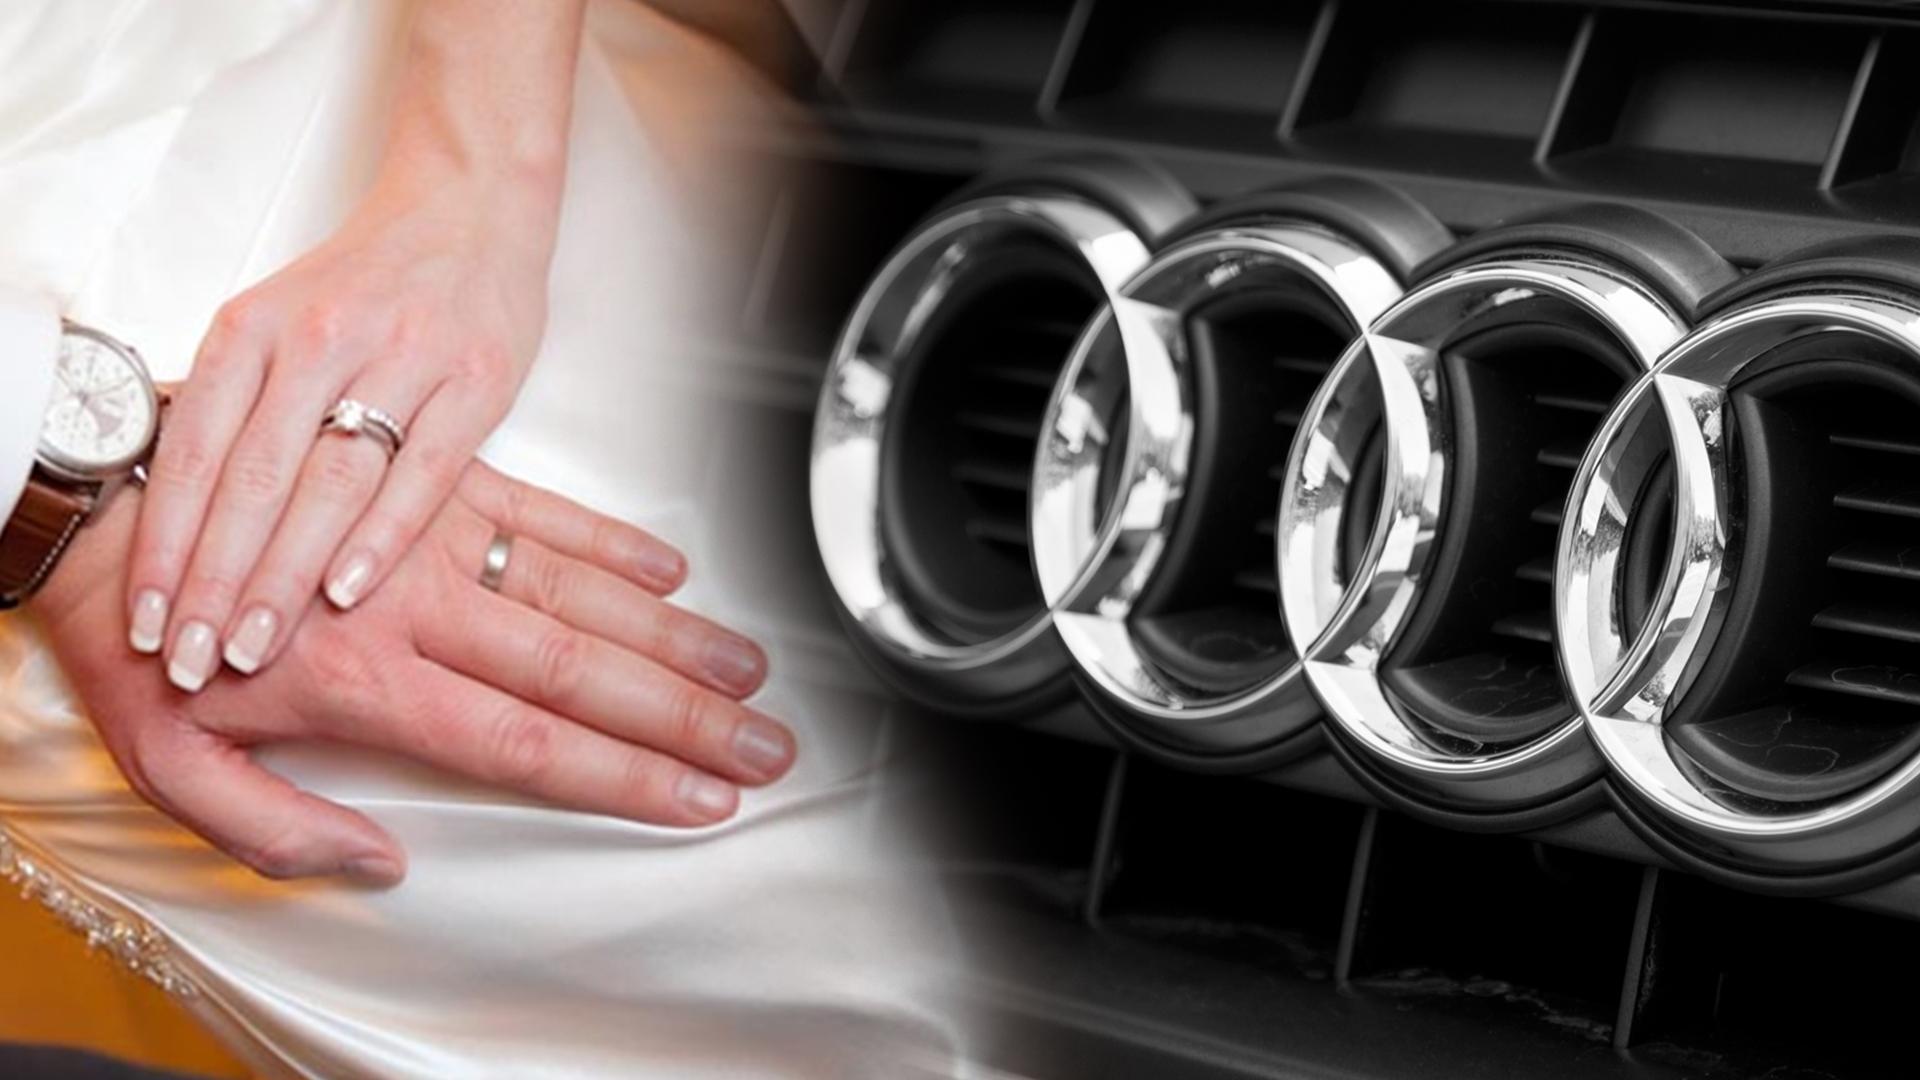 Soms huurling Mening Audi Pune X:ssä: "The Ring She Wants Vs The Rings He Want!! #Audi #love  http://t.co/afT5iO3fqK" / X